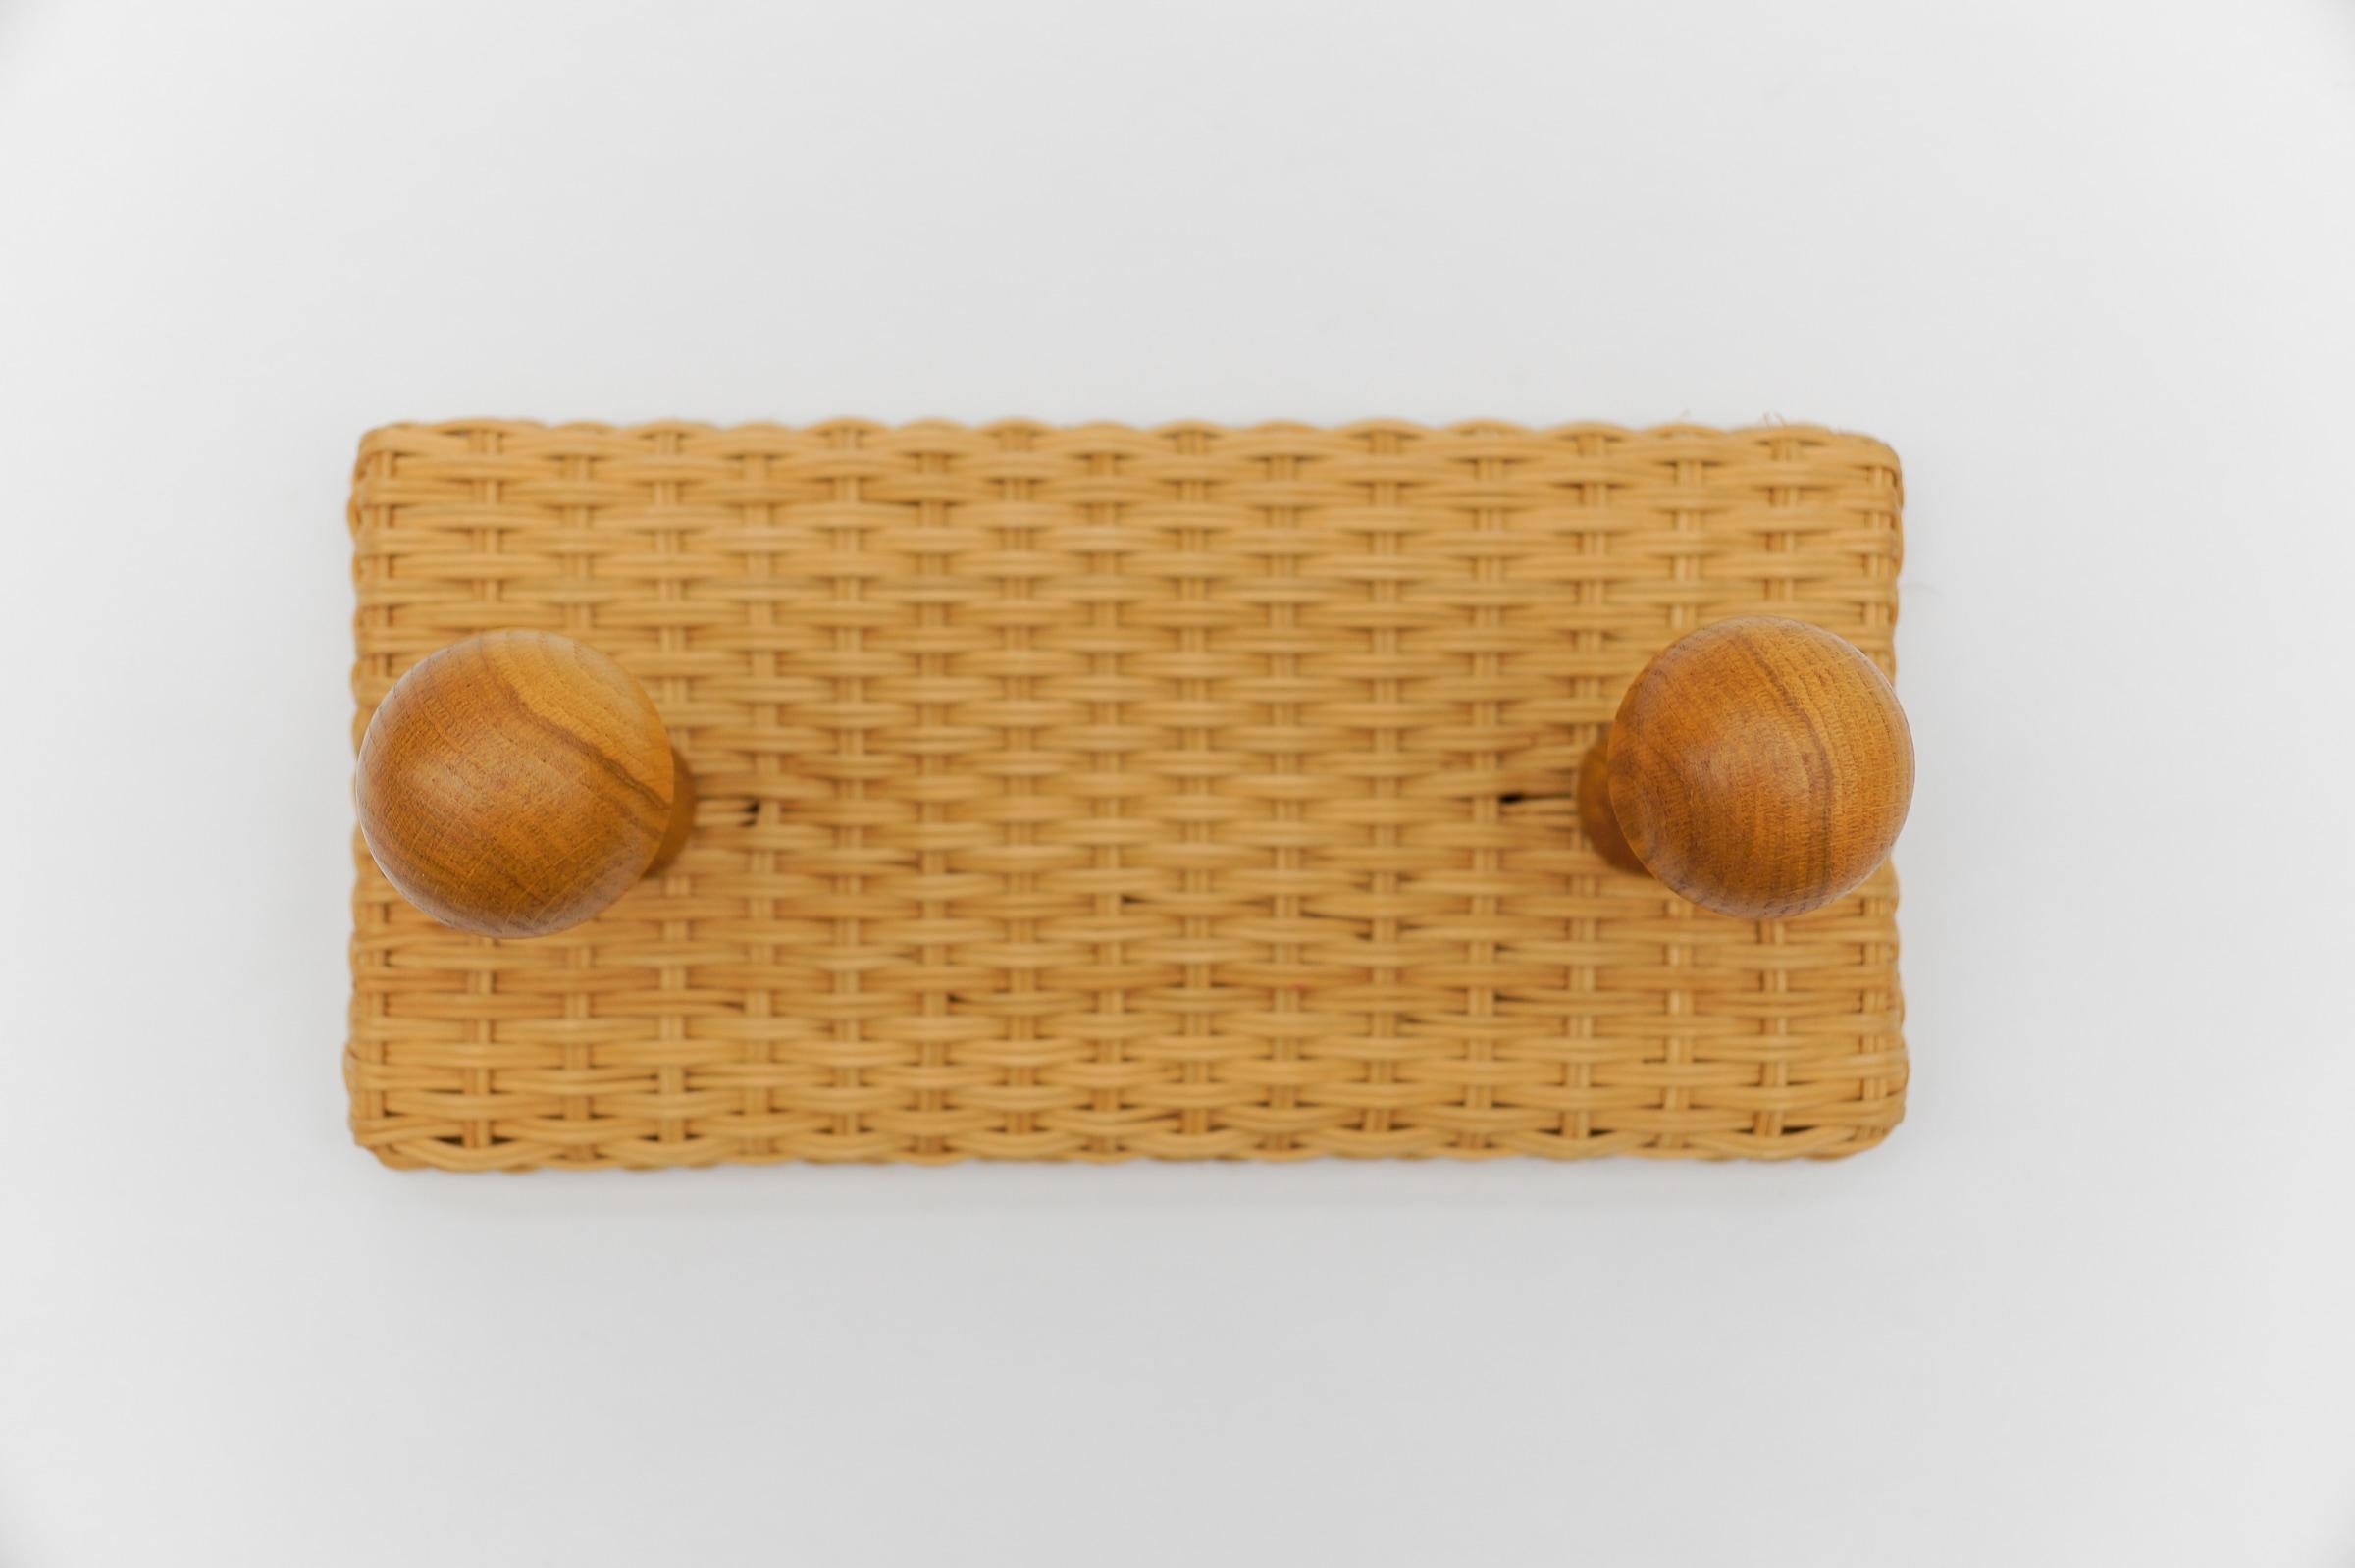 Pair of Double Scandinavian Wall Mounted Coat Hooks in Rattan and Wood, 1960s For Sale 2